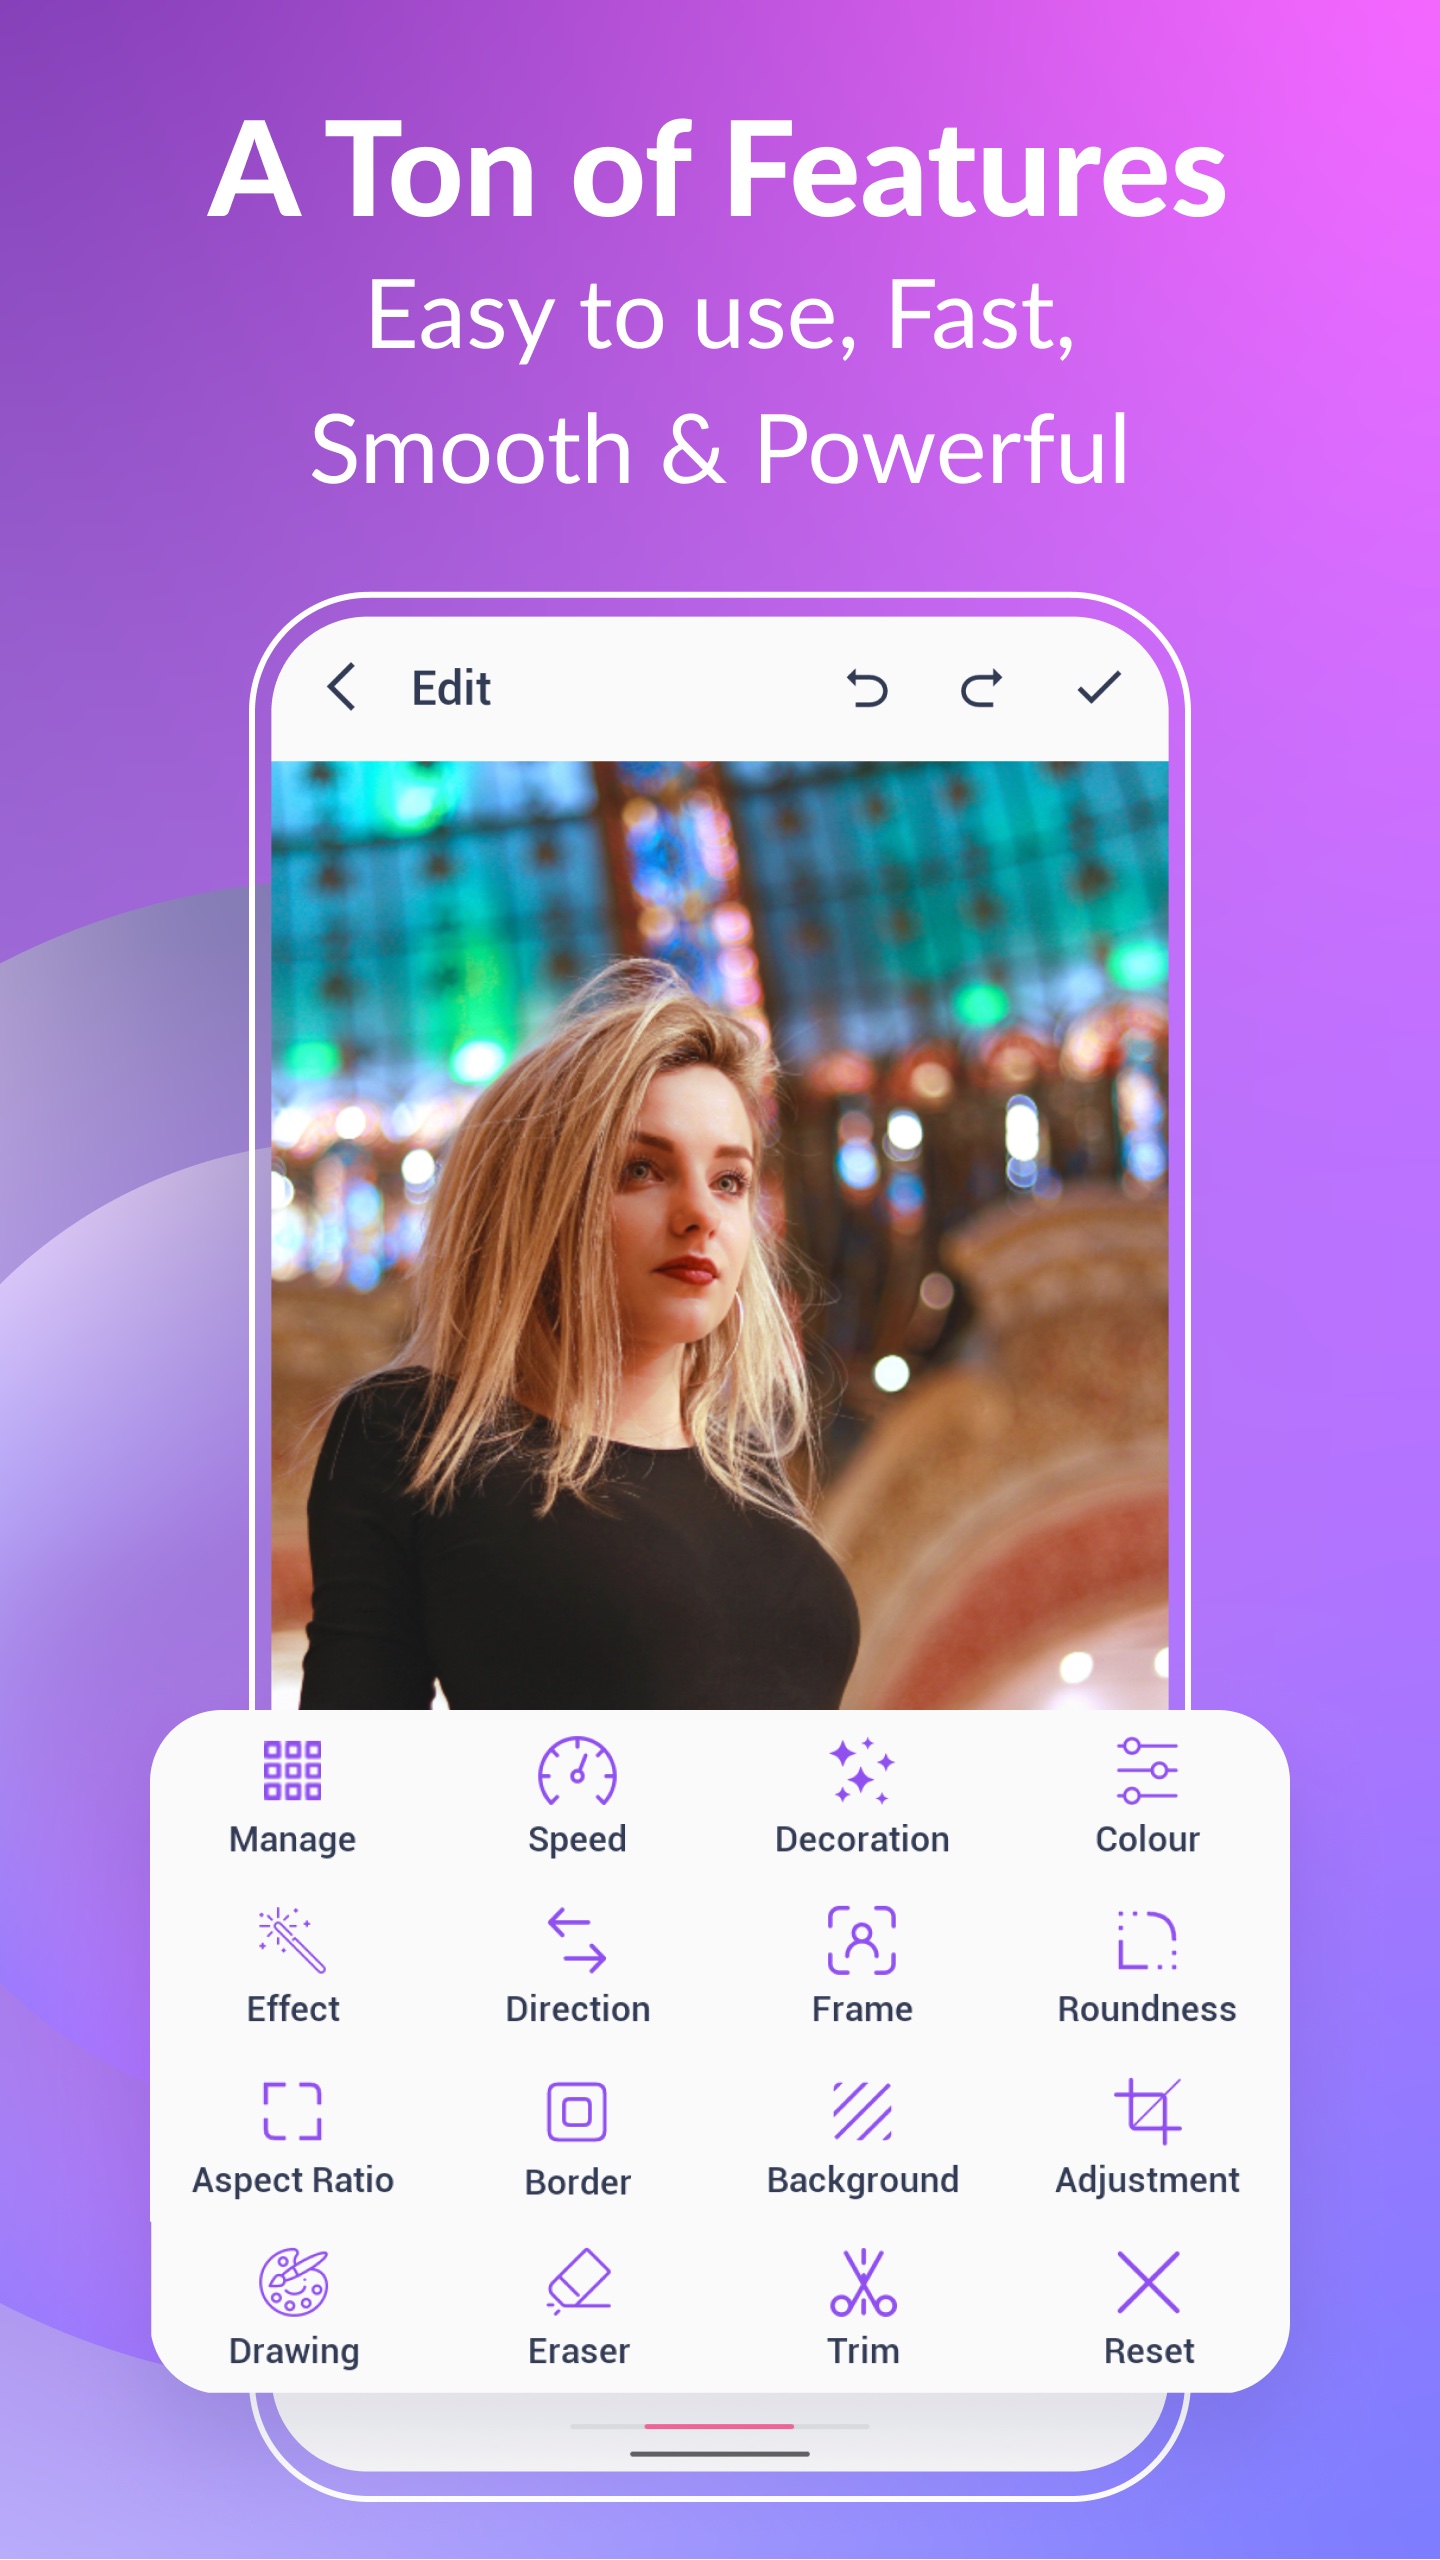 GIF Maker, GIF Editor Video to GIF Pro v1.6.45 Pro APK for Android